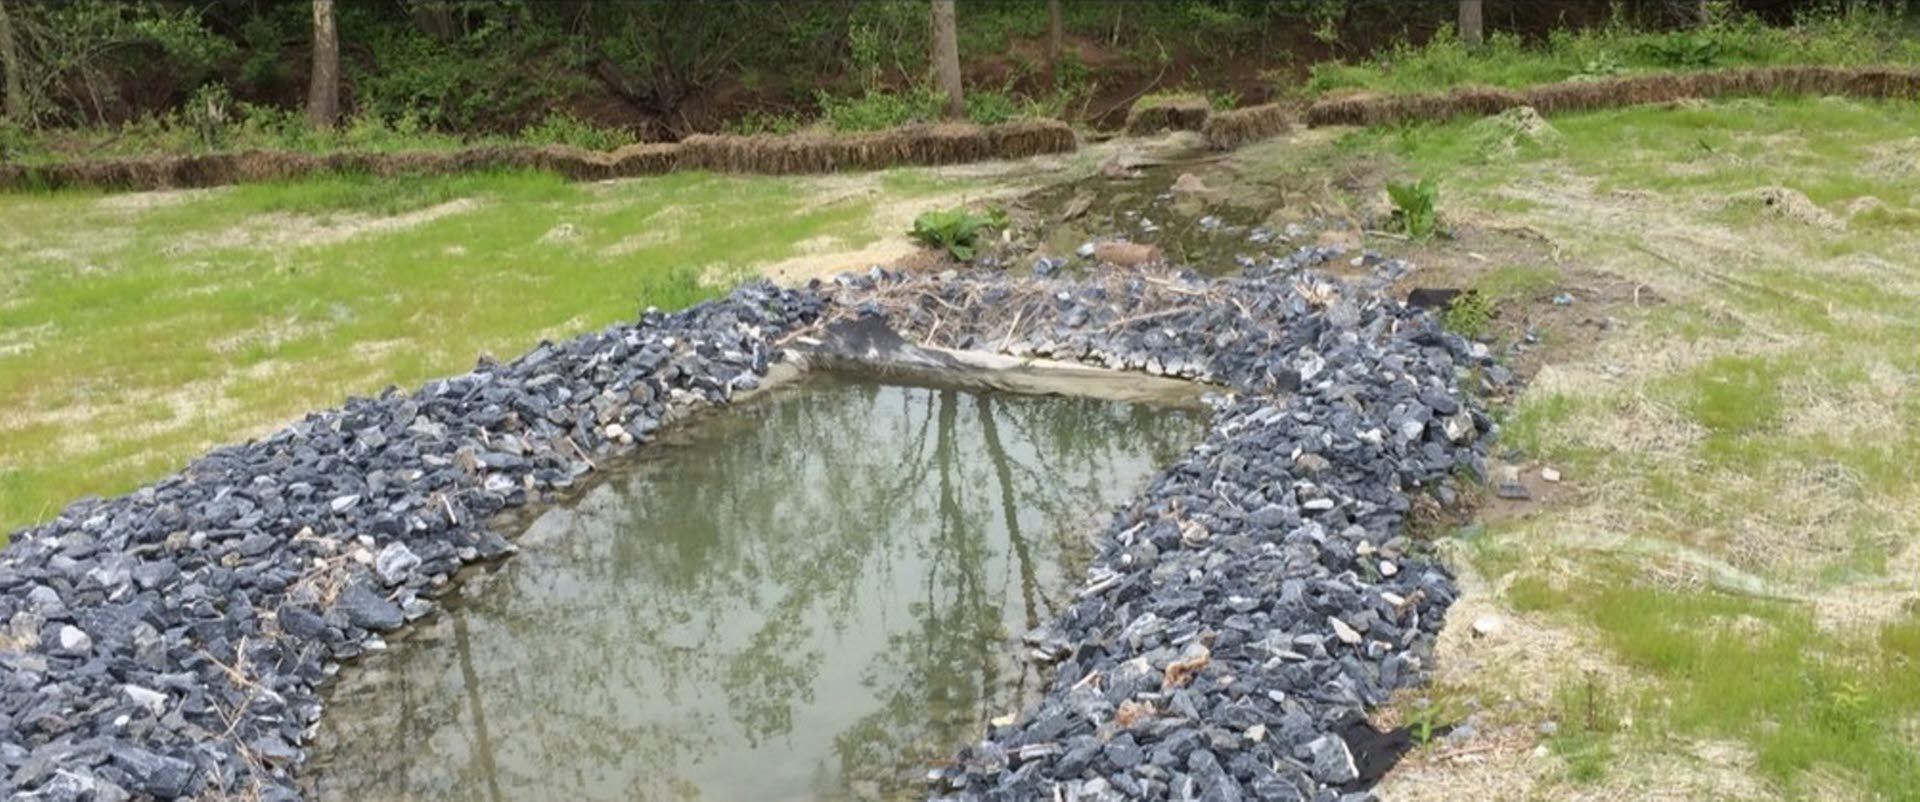 Stormwater basin improvements protect streams and vegetation